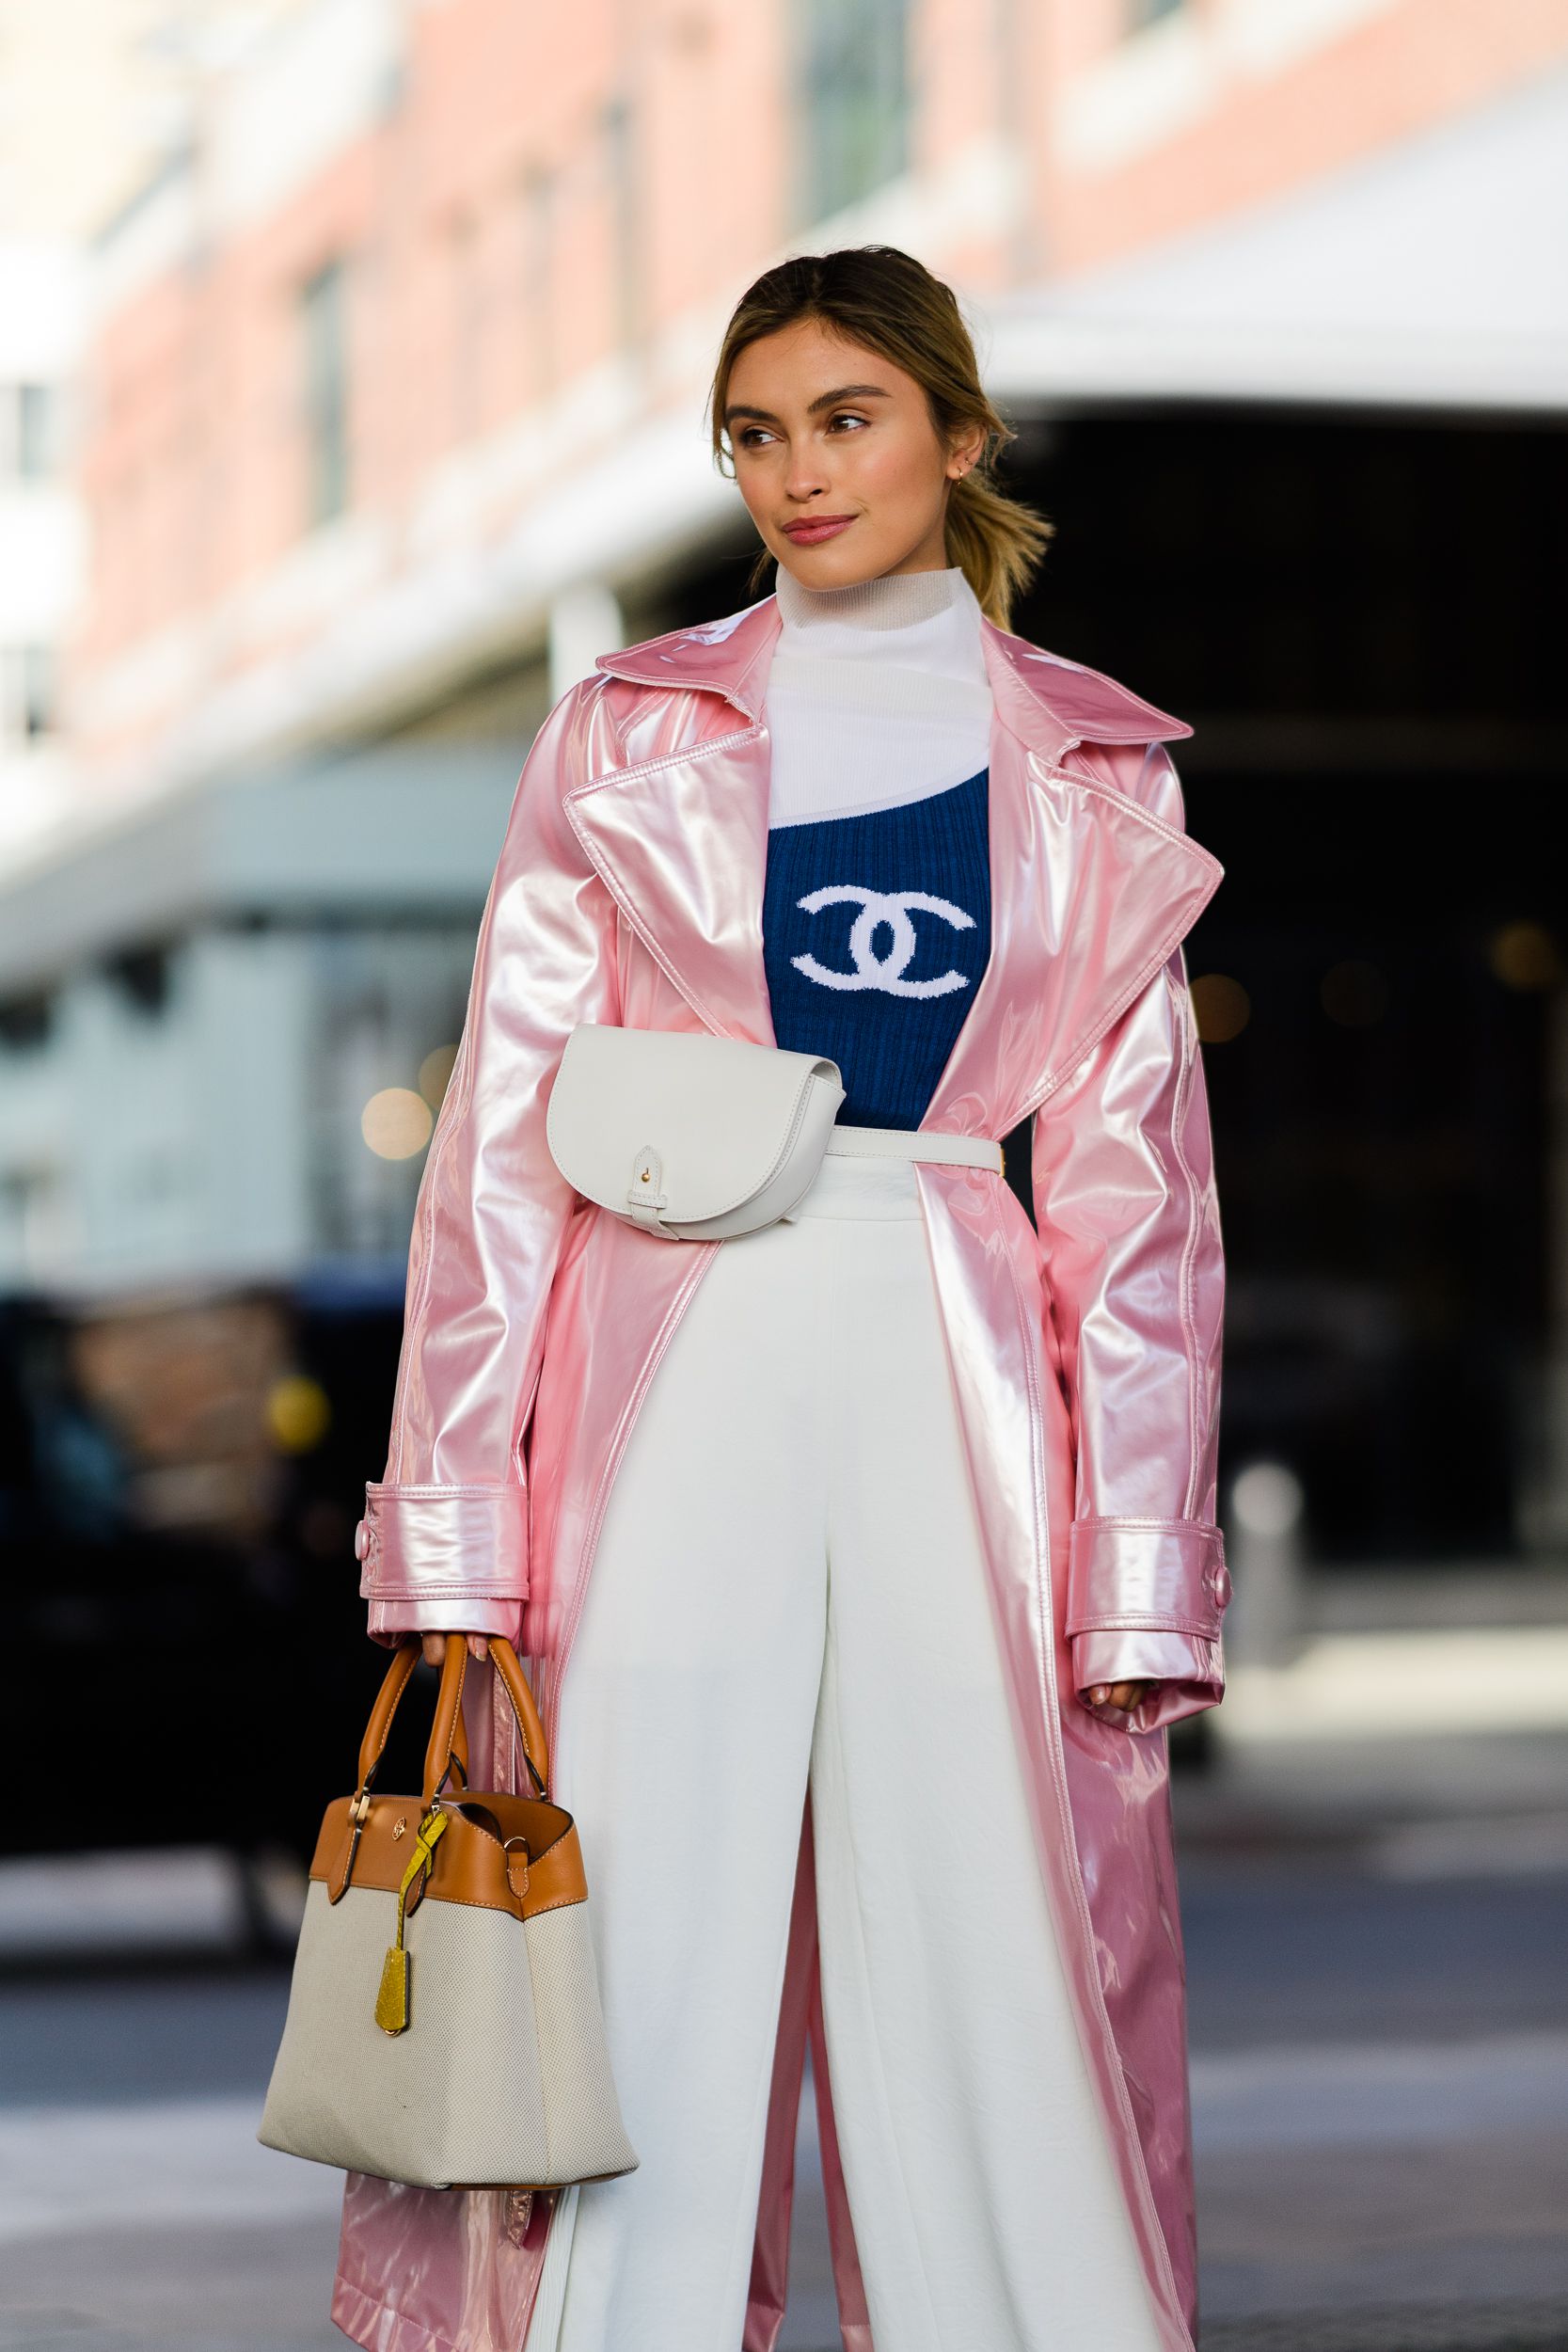 NYFW: Trends Spotted on and off the Runway — Anna Elizabeth